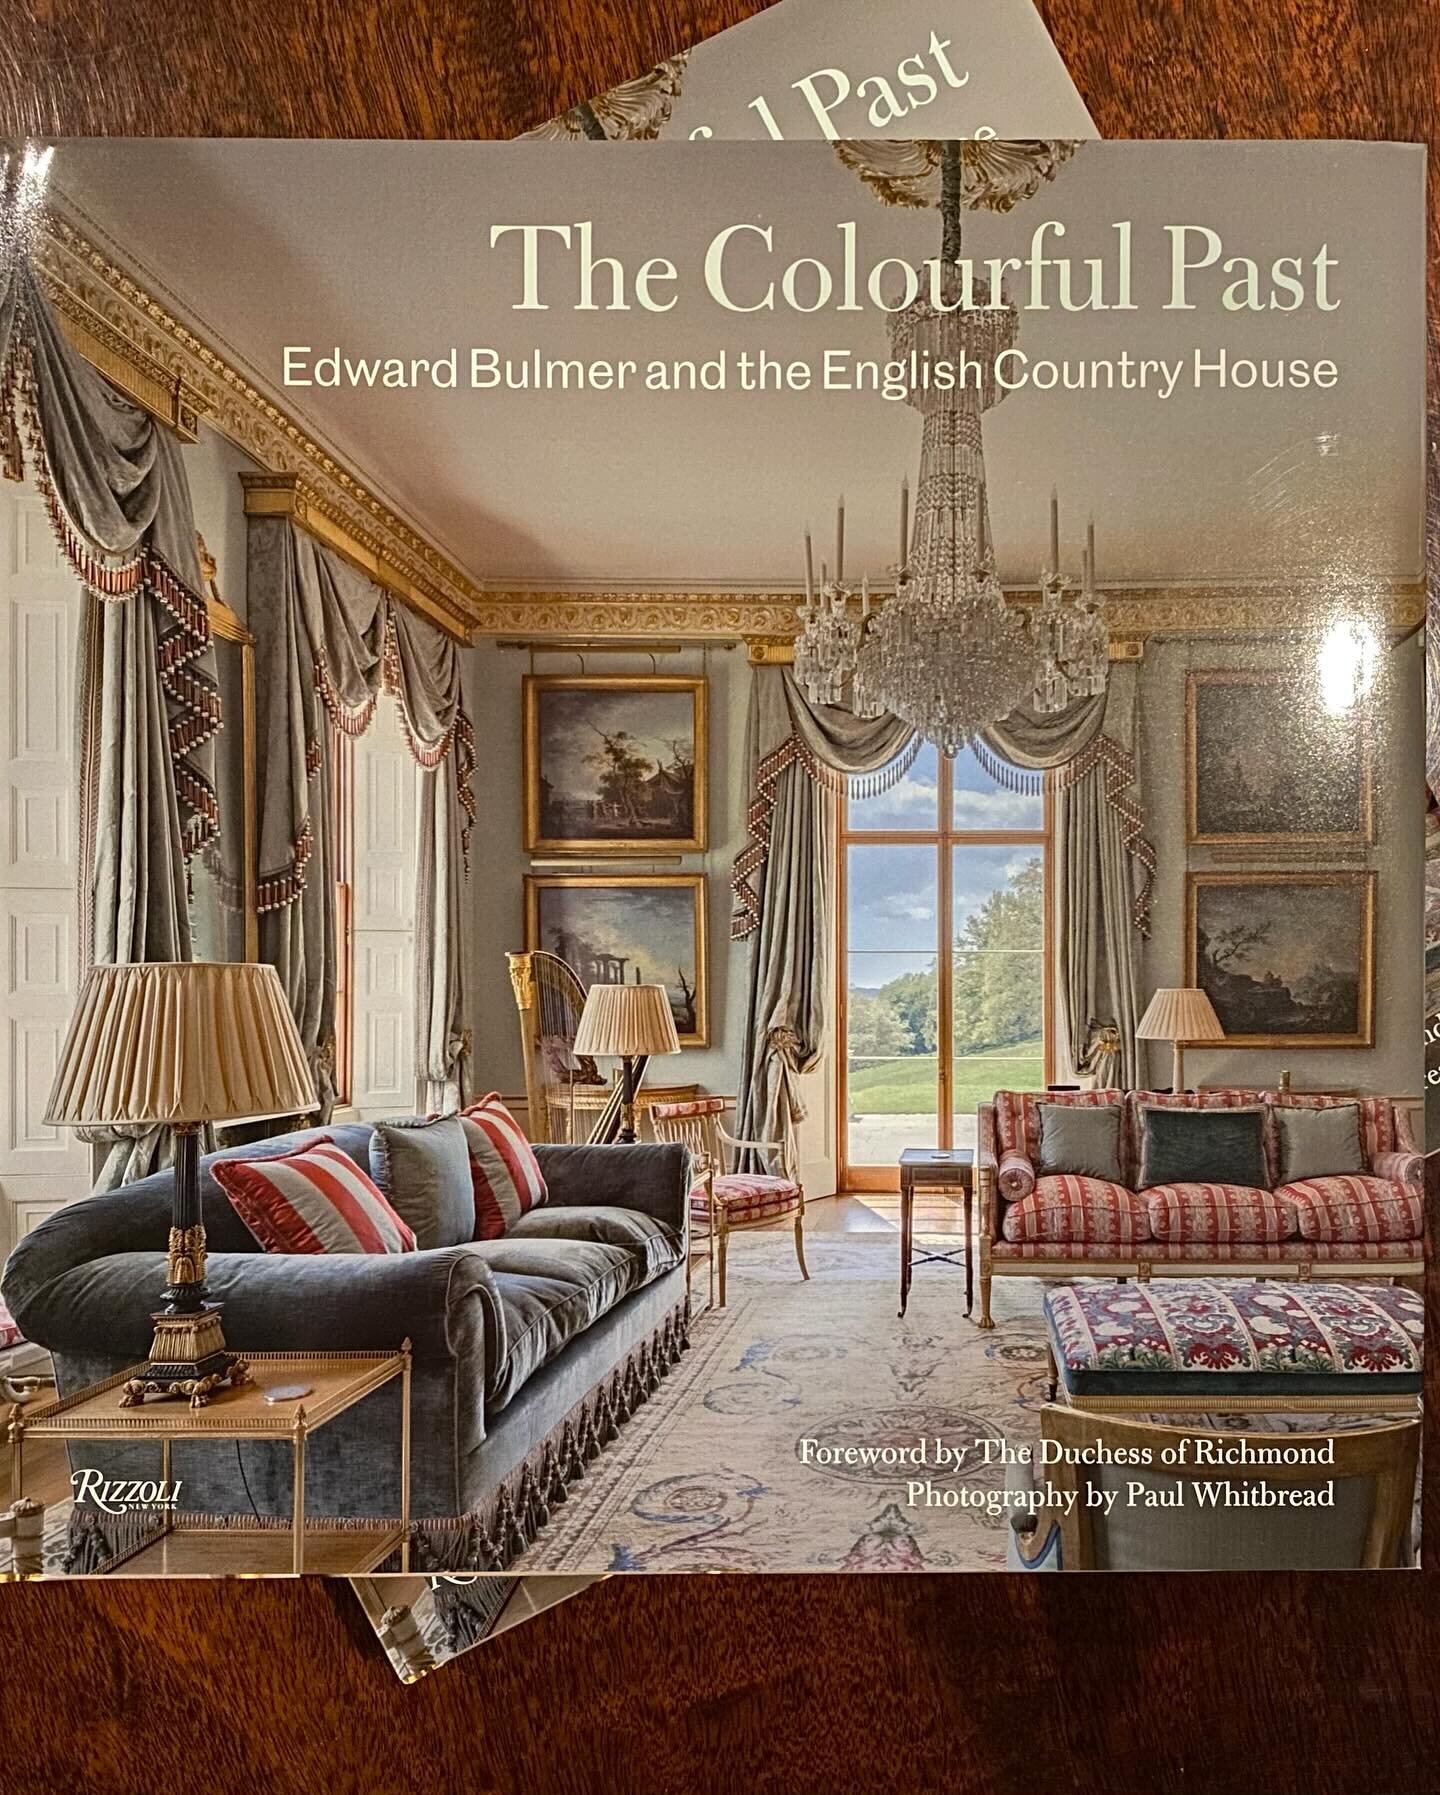 Following the hugely successful evening we hosted with Edward Bulmer in aid of The Nelson Trust we have 5 signed copies of Edward&rsquo;s book &lsquo;The Colourful Past&rsquo; in stock.

Secure yours today by buying online or in store at the special 